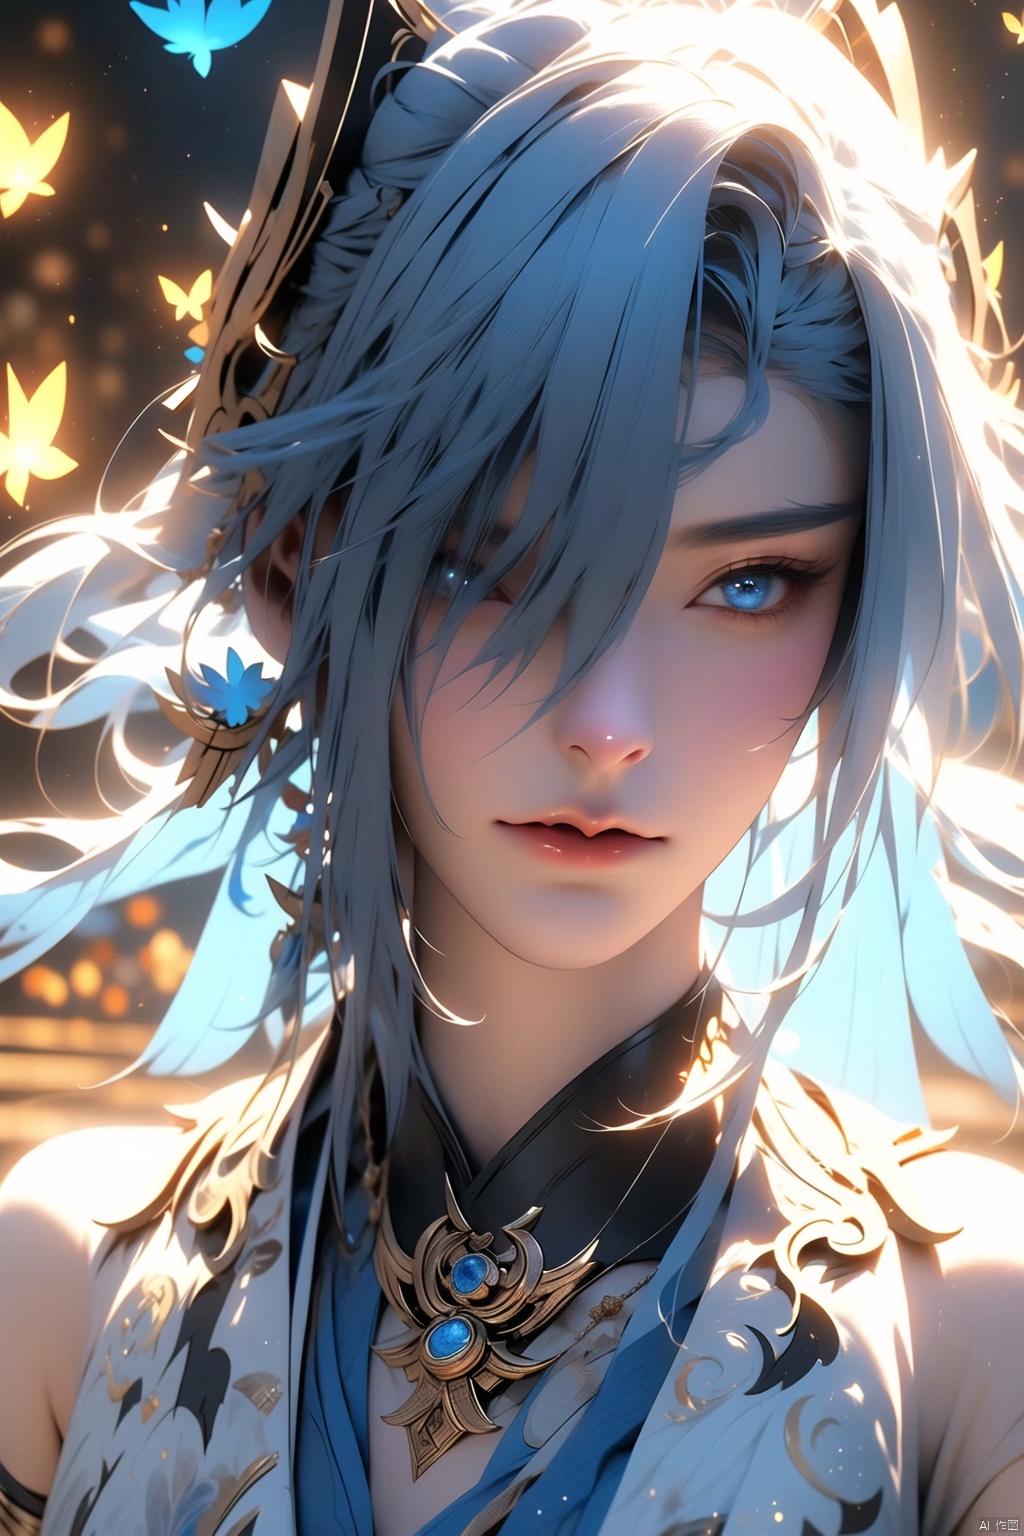 Golden light, blue hair, blue eyes, beautiful girl, smooth and straight hair, 3D effect, film texture, figures accounting for one-third of the picture, bust, butterflies flying around, flames on the hands,blue and white necklace(around her neck), and heroic